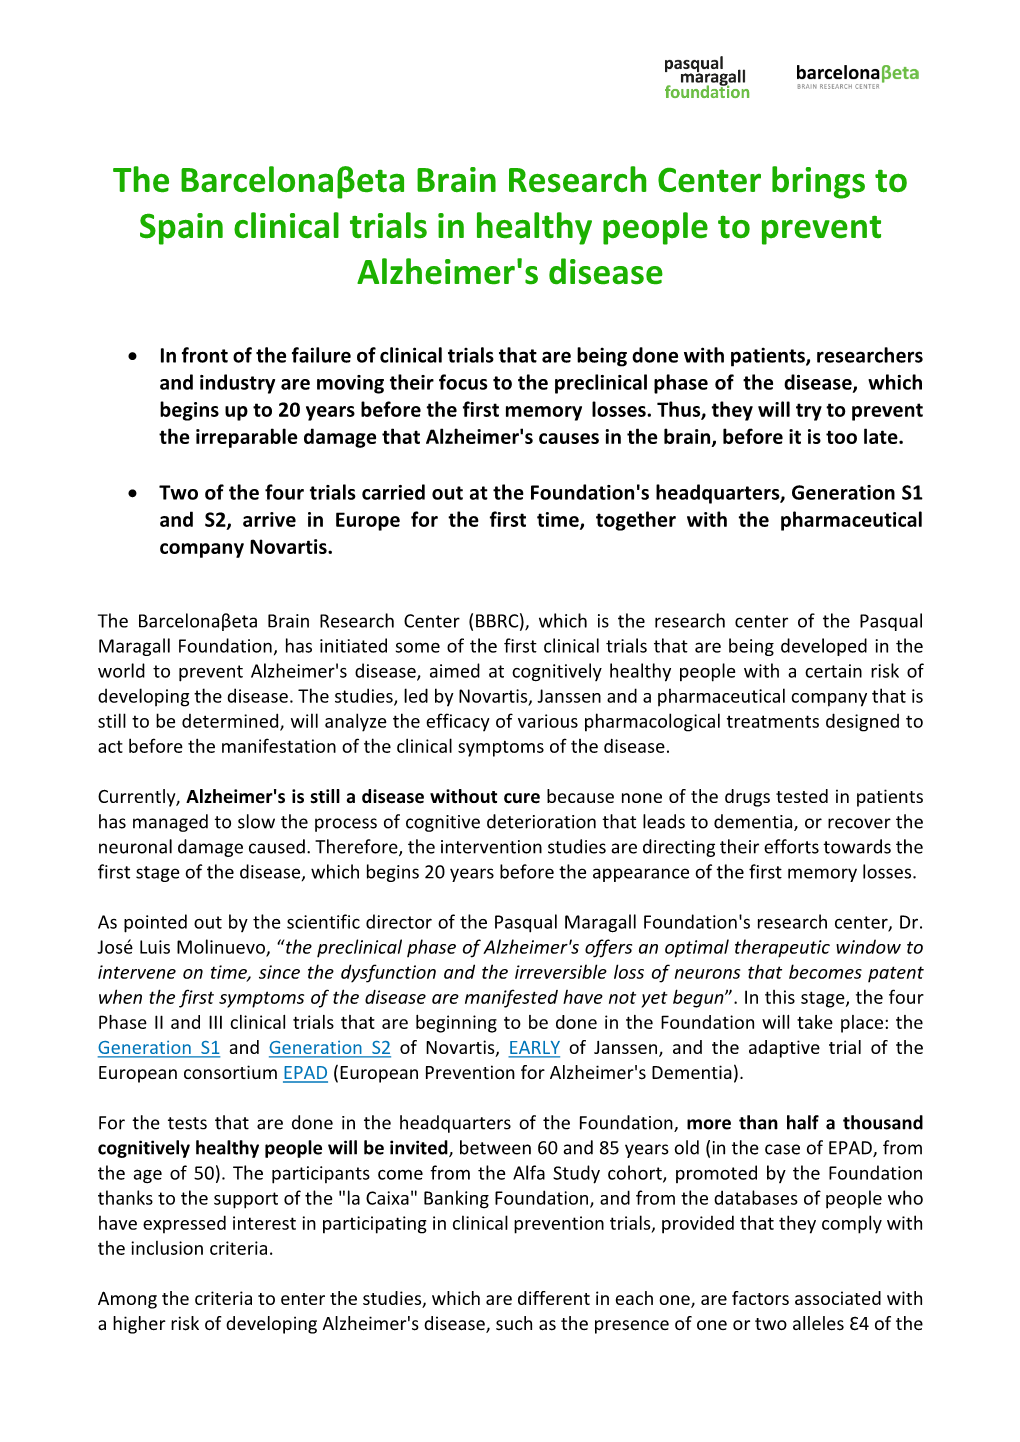 The Barcelonaβeta Brain Research Center Brings to Spain Clinical Trials in Healthy People to Prevent Alzheimer's Disease